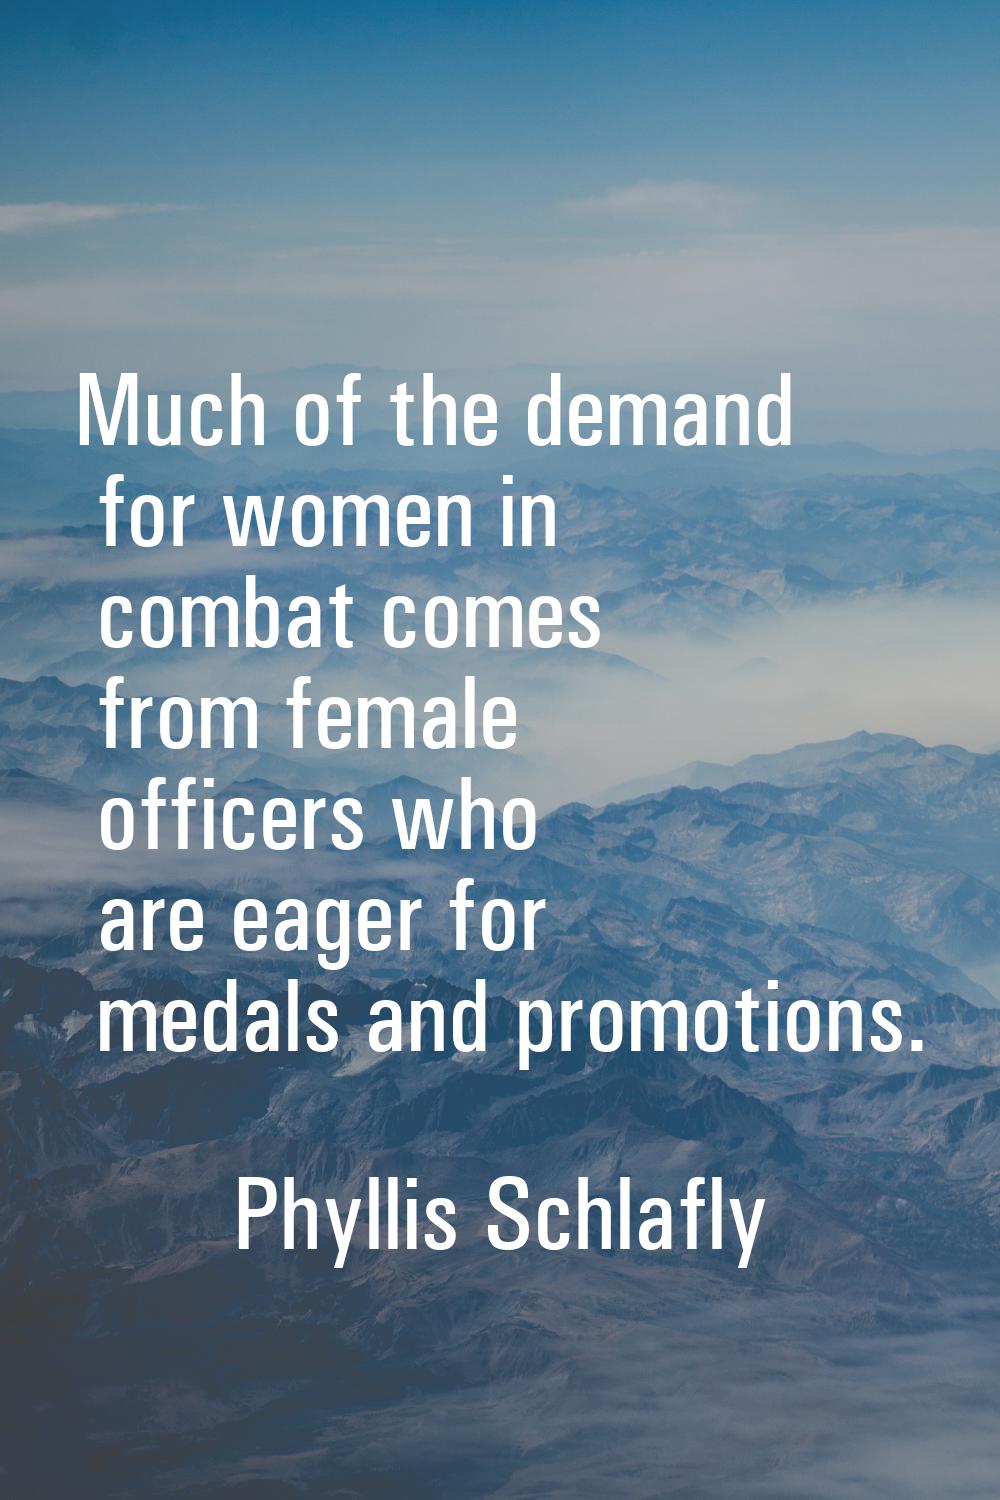 Much of the demand for women in combat comes from female officers who are eager for medals and prom